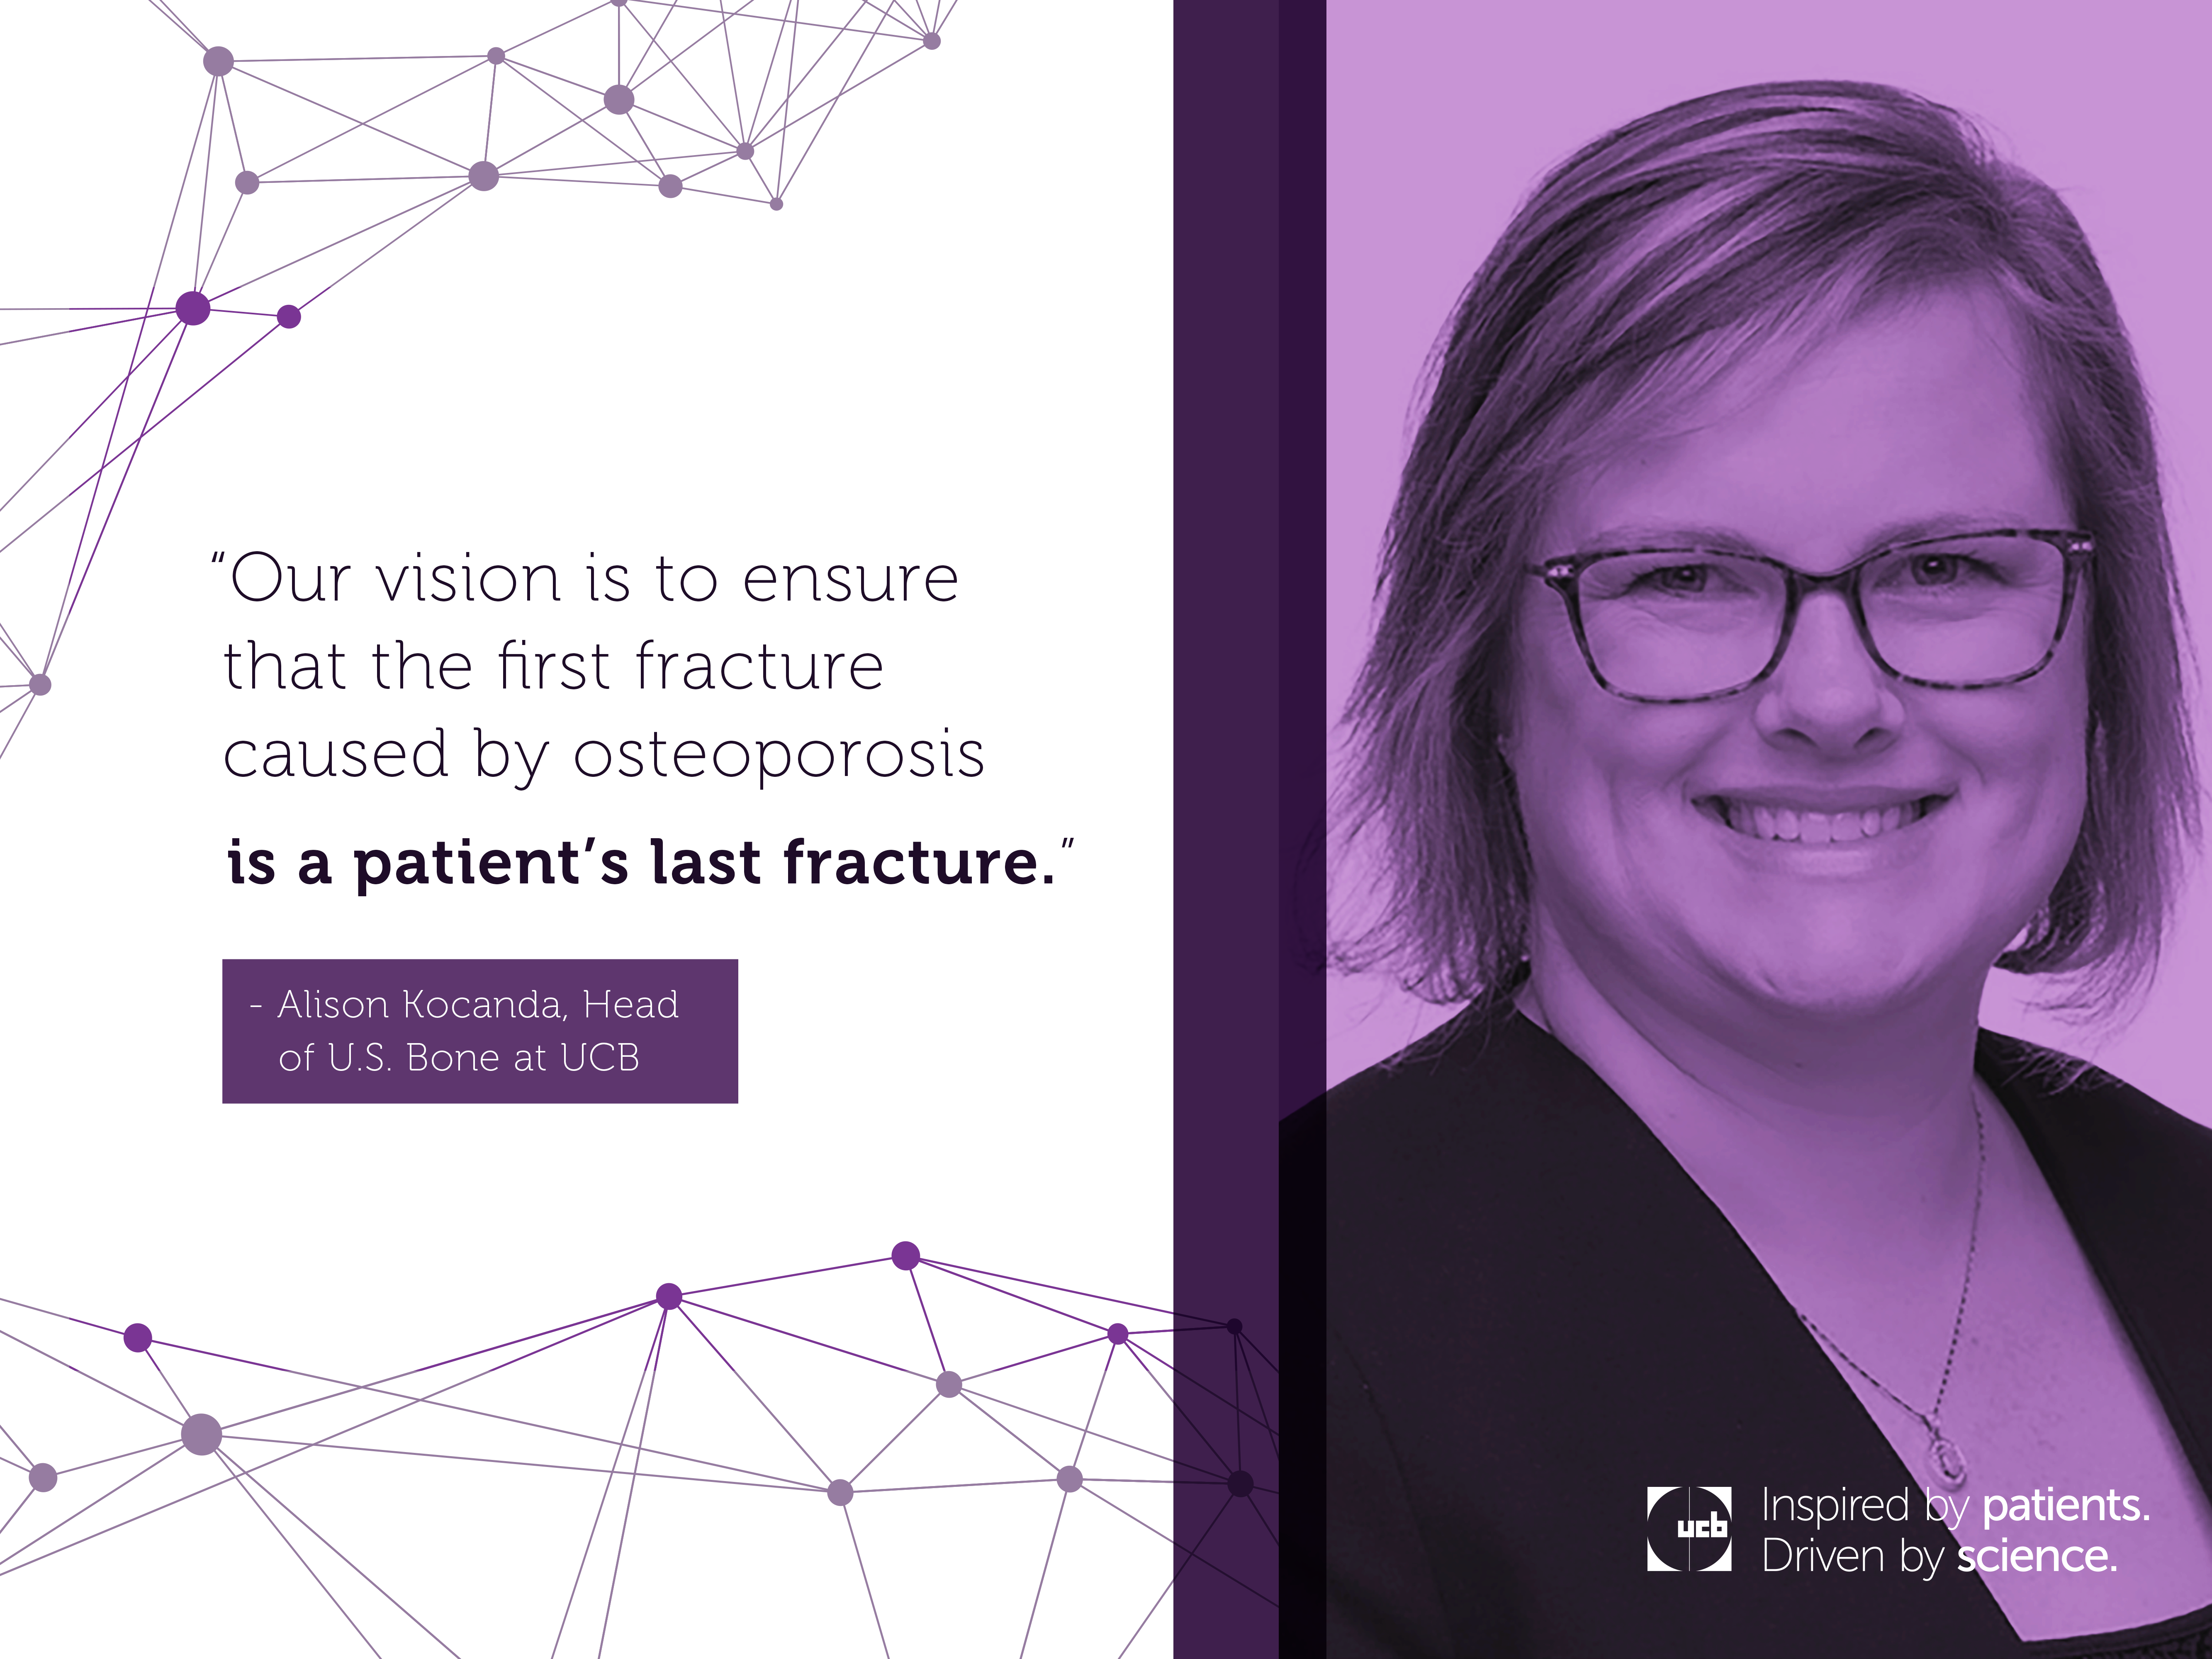 Purple headshot of Alison Kocanda, Head of UCB U.S. Bone, with quote on how UCB is supporting osteoporosis patients.